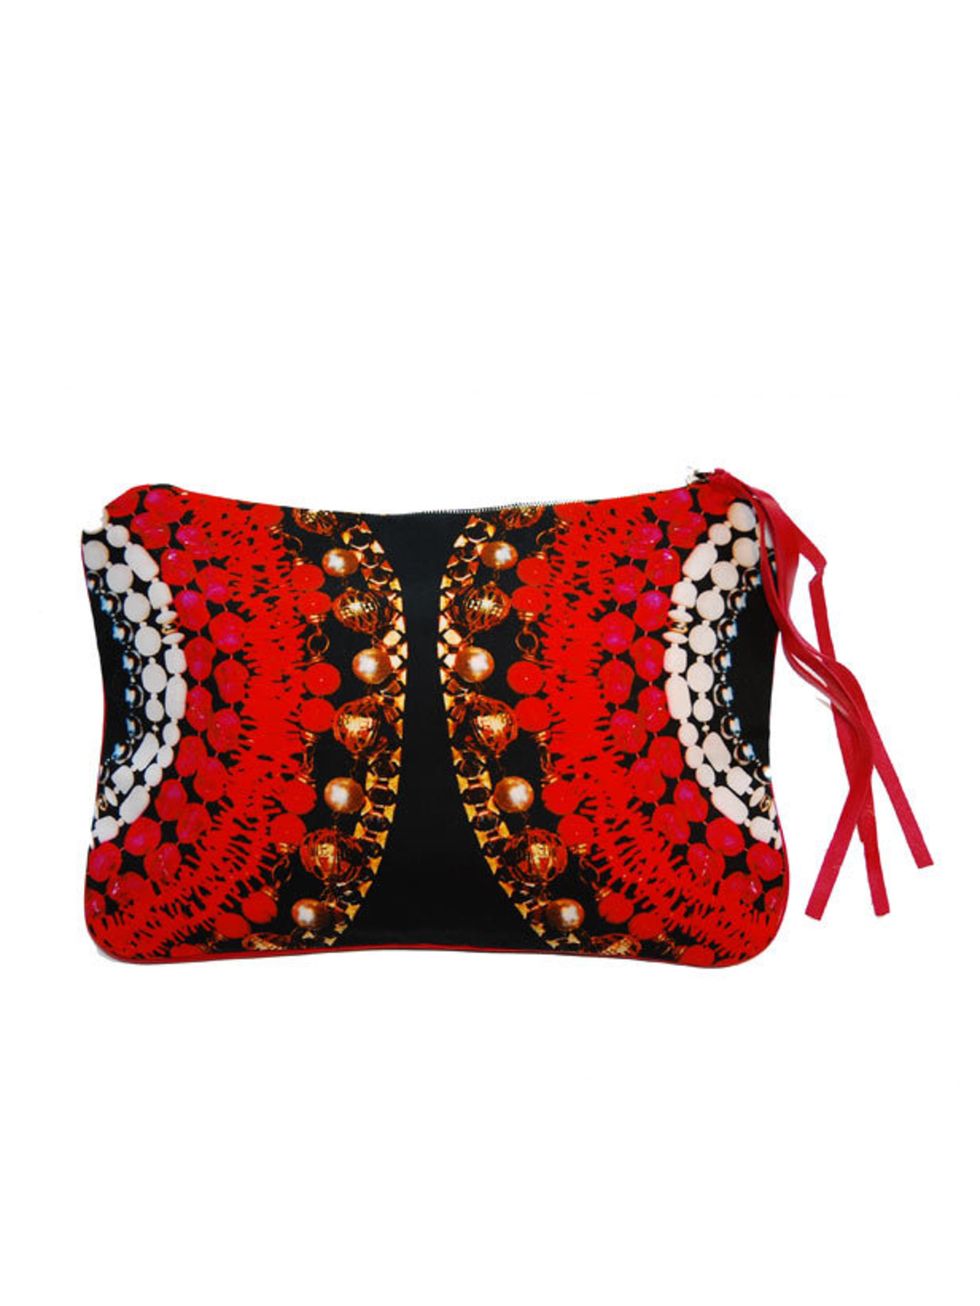 <p>Make a style statement at this year's Christmas party by avoiding the glitzy bags and opting for this digitally printed, Mary Katrantzou-inspired clutch... <a href="http://www.carmenwoods.com/">Carmen Woods</a> printed clutch, £59</p>